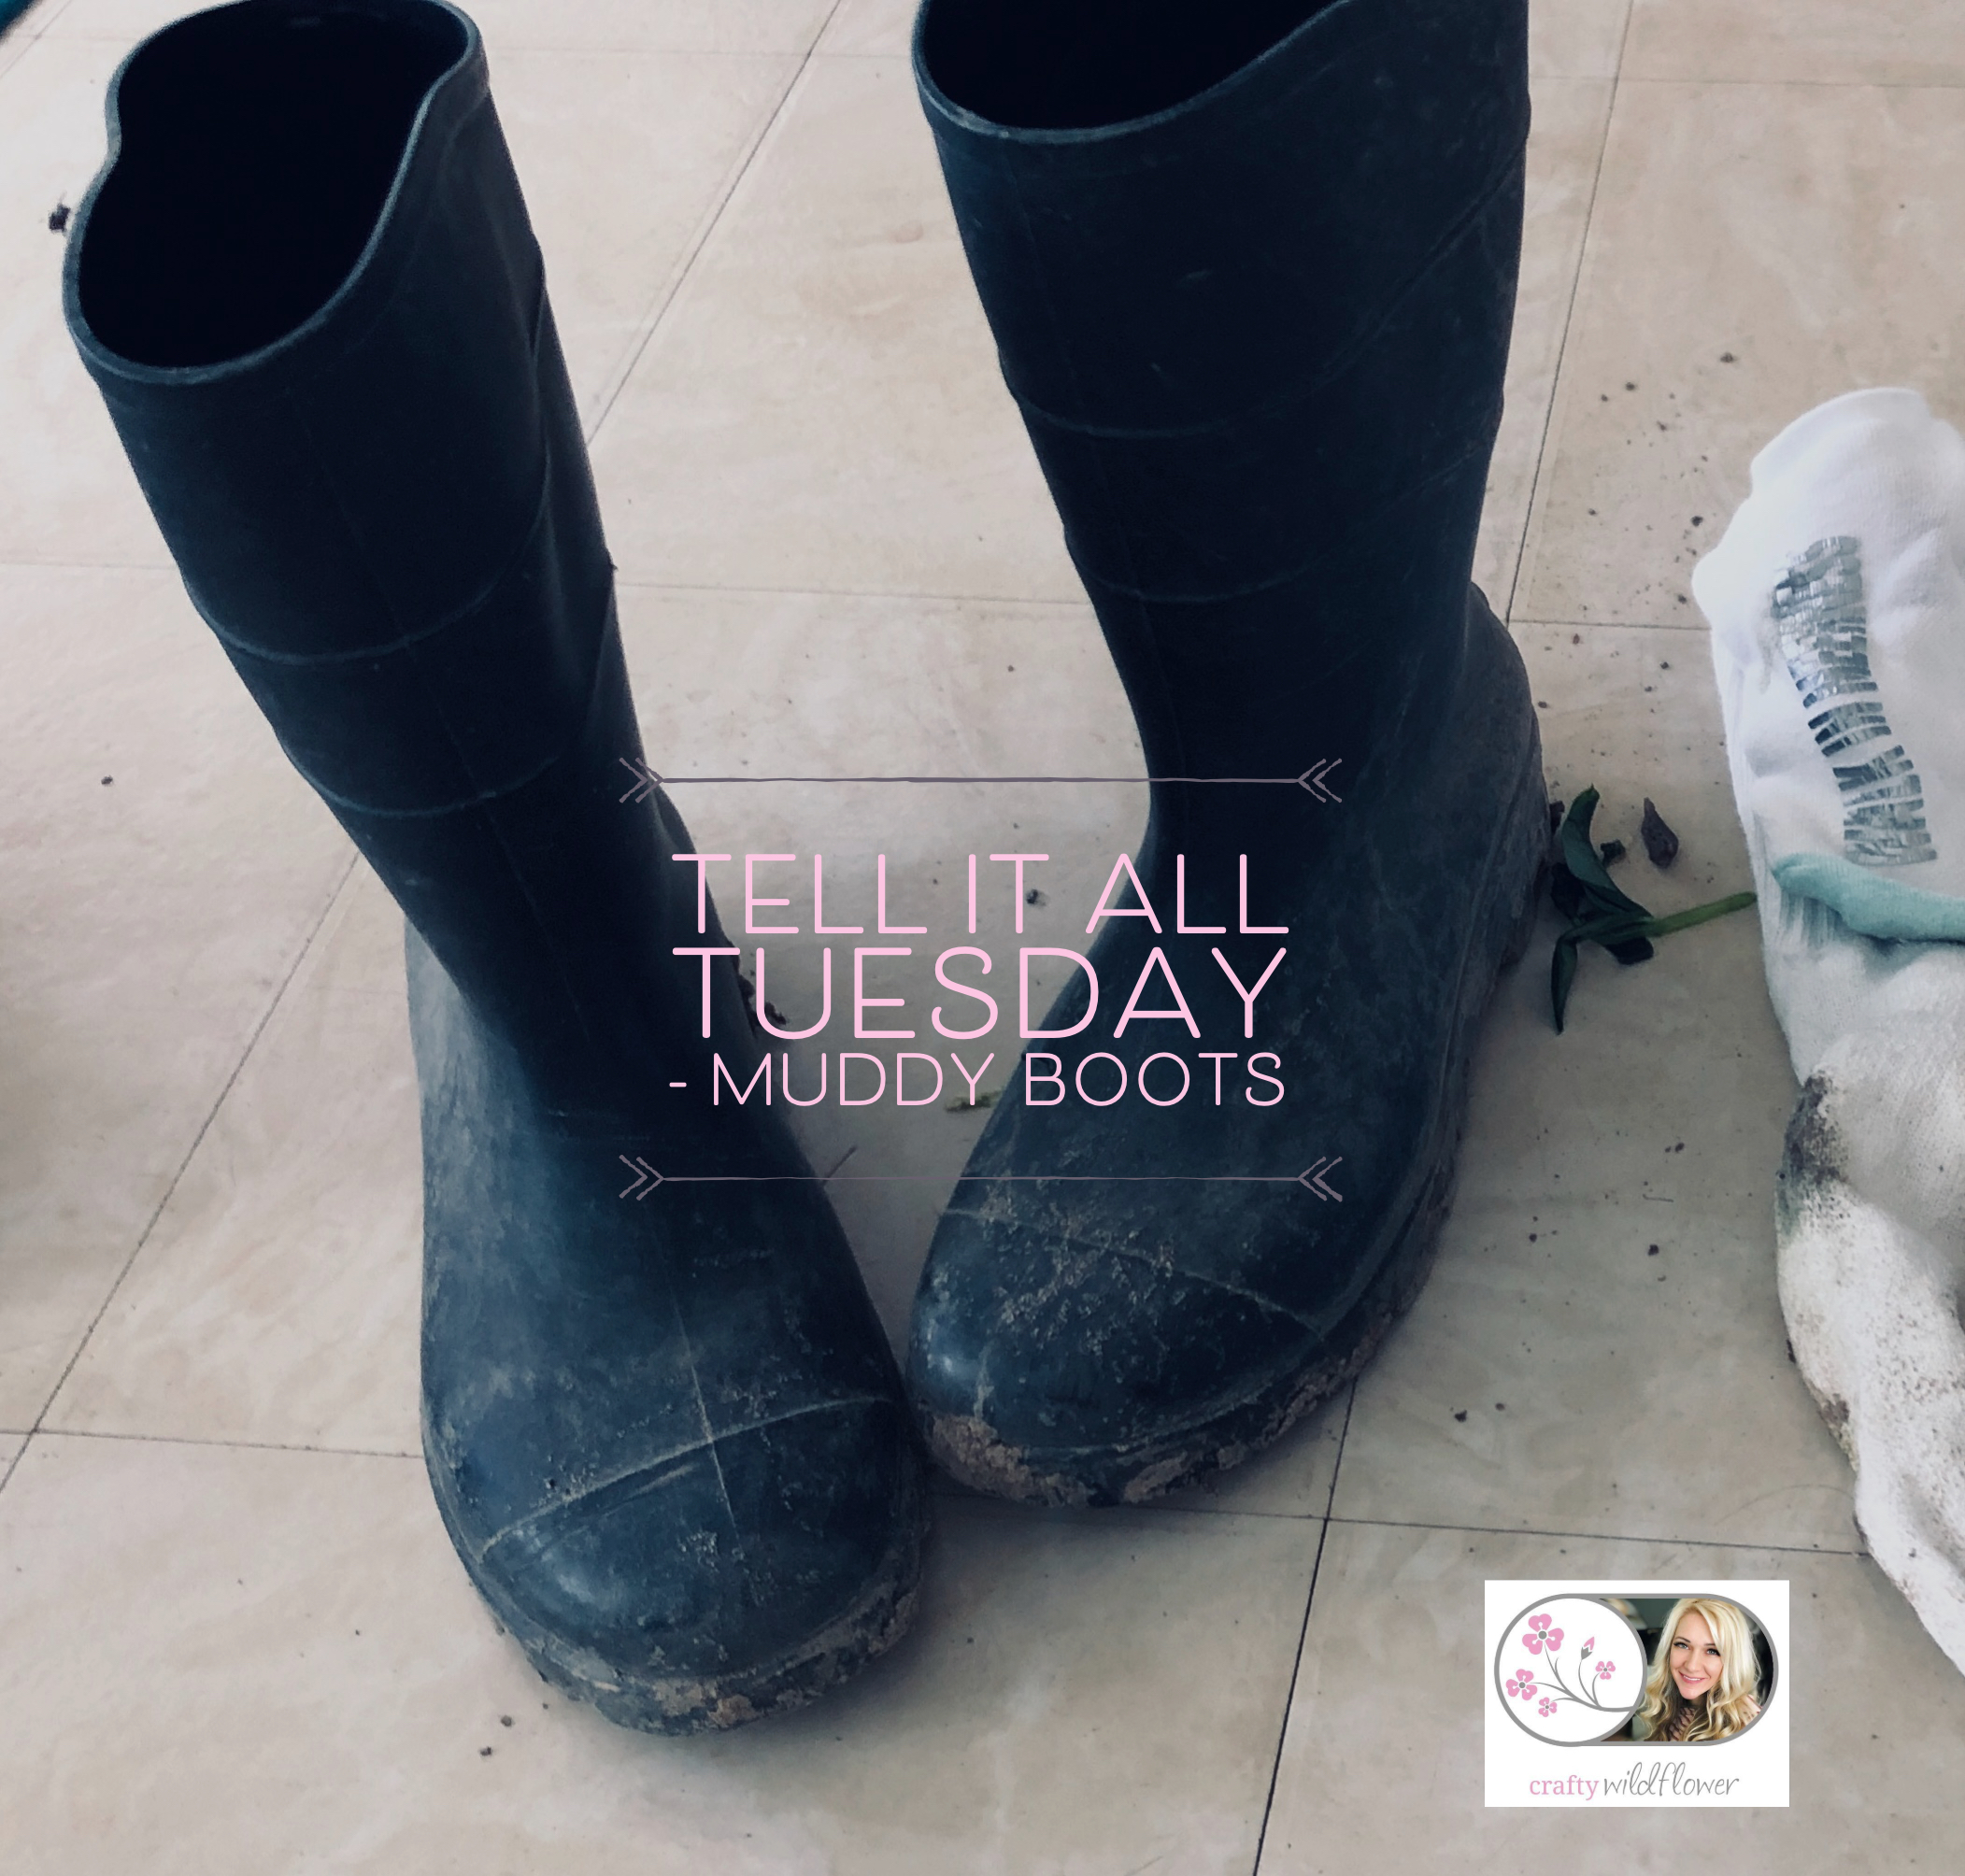 Tell it all Tuesday – Muddy Boots